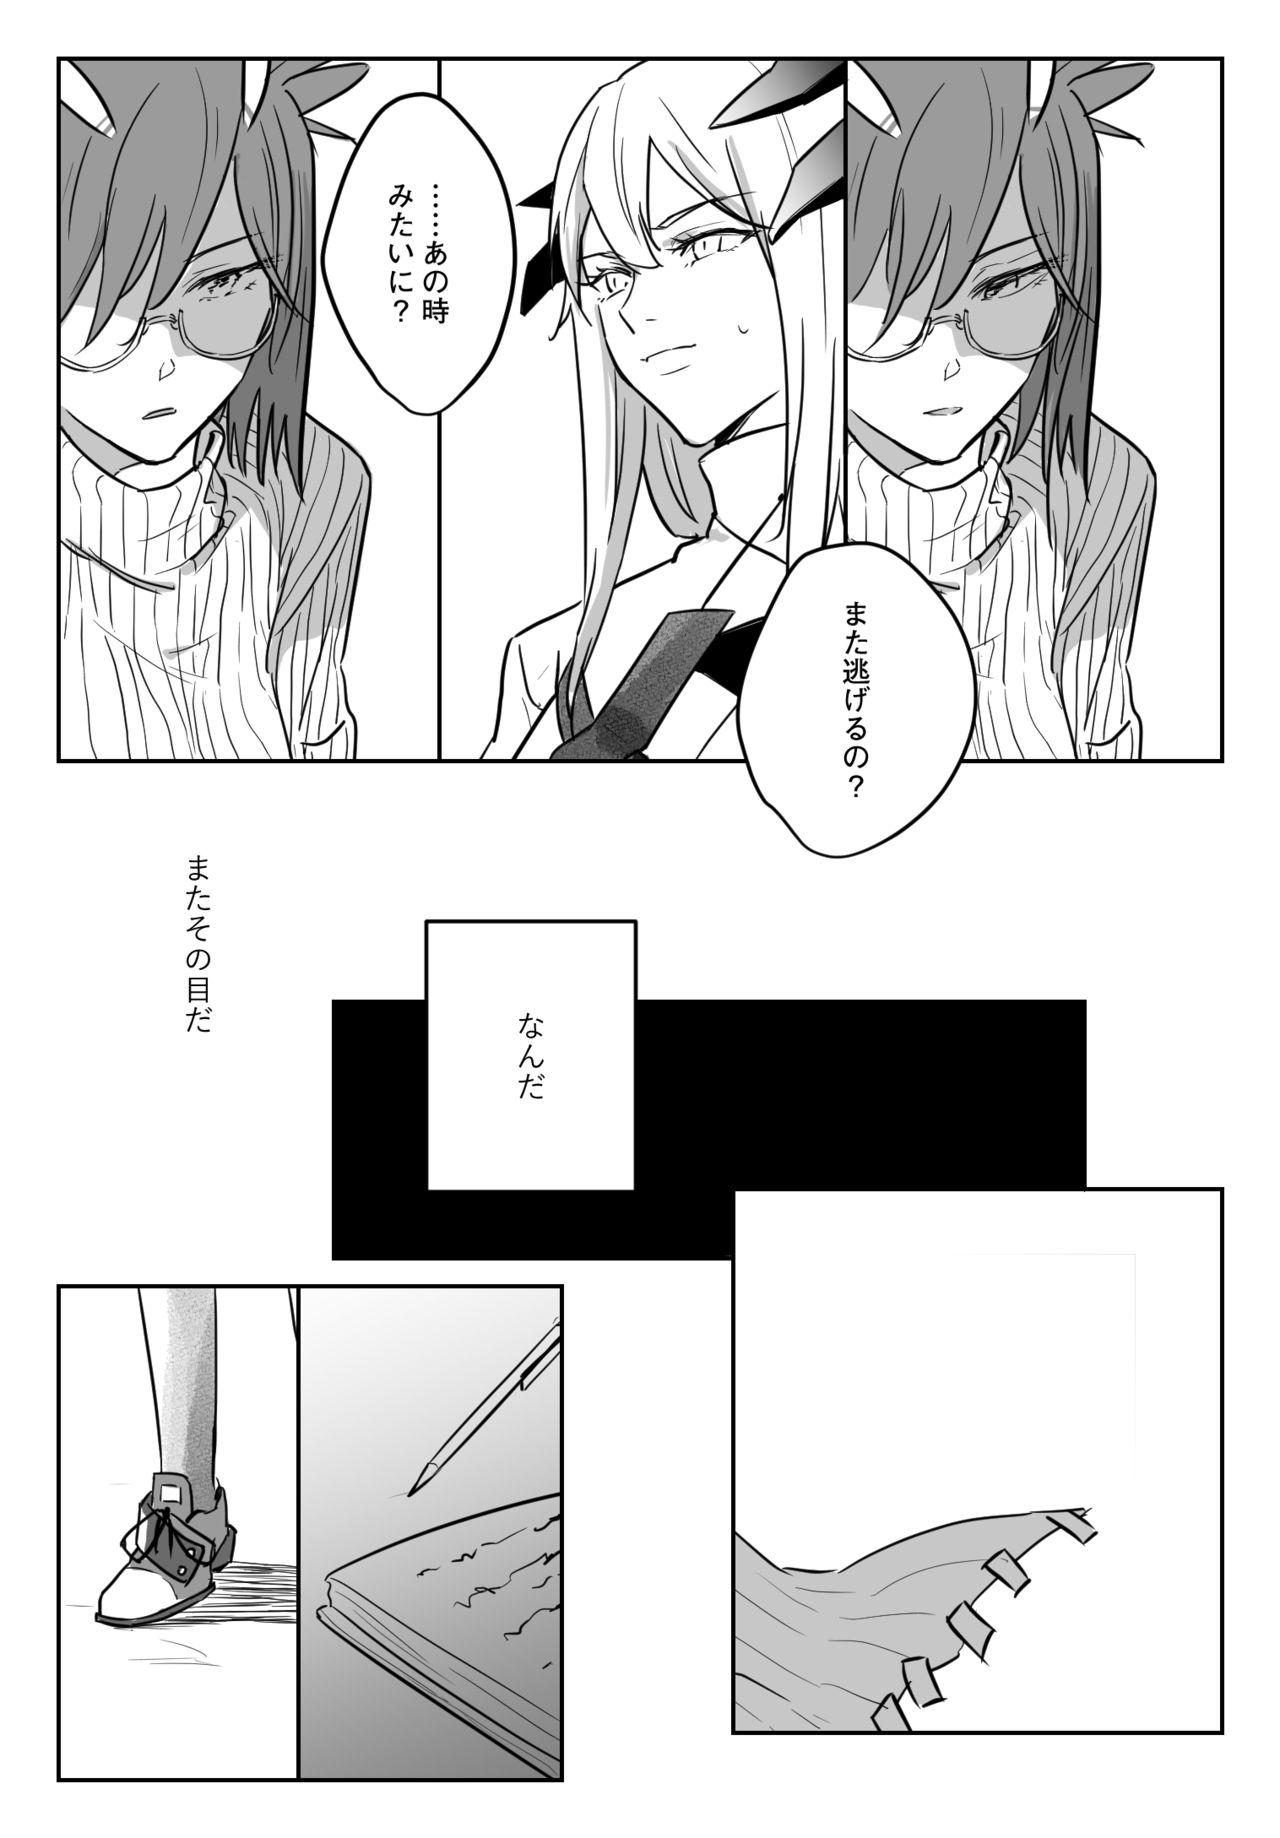 Stream 龍性淫 - Arknights Dykes - Page 6